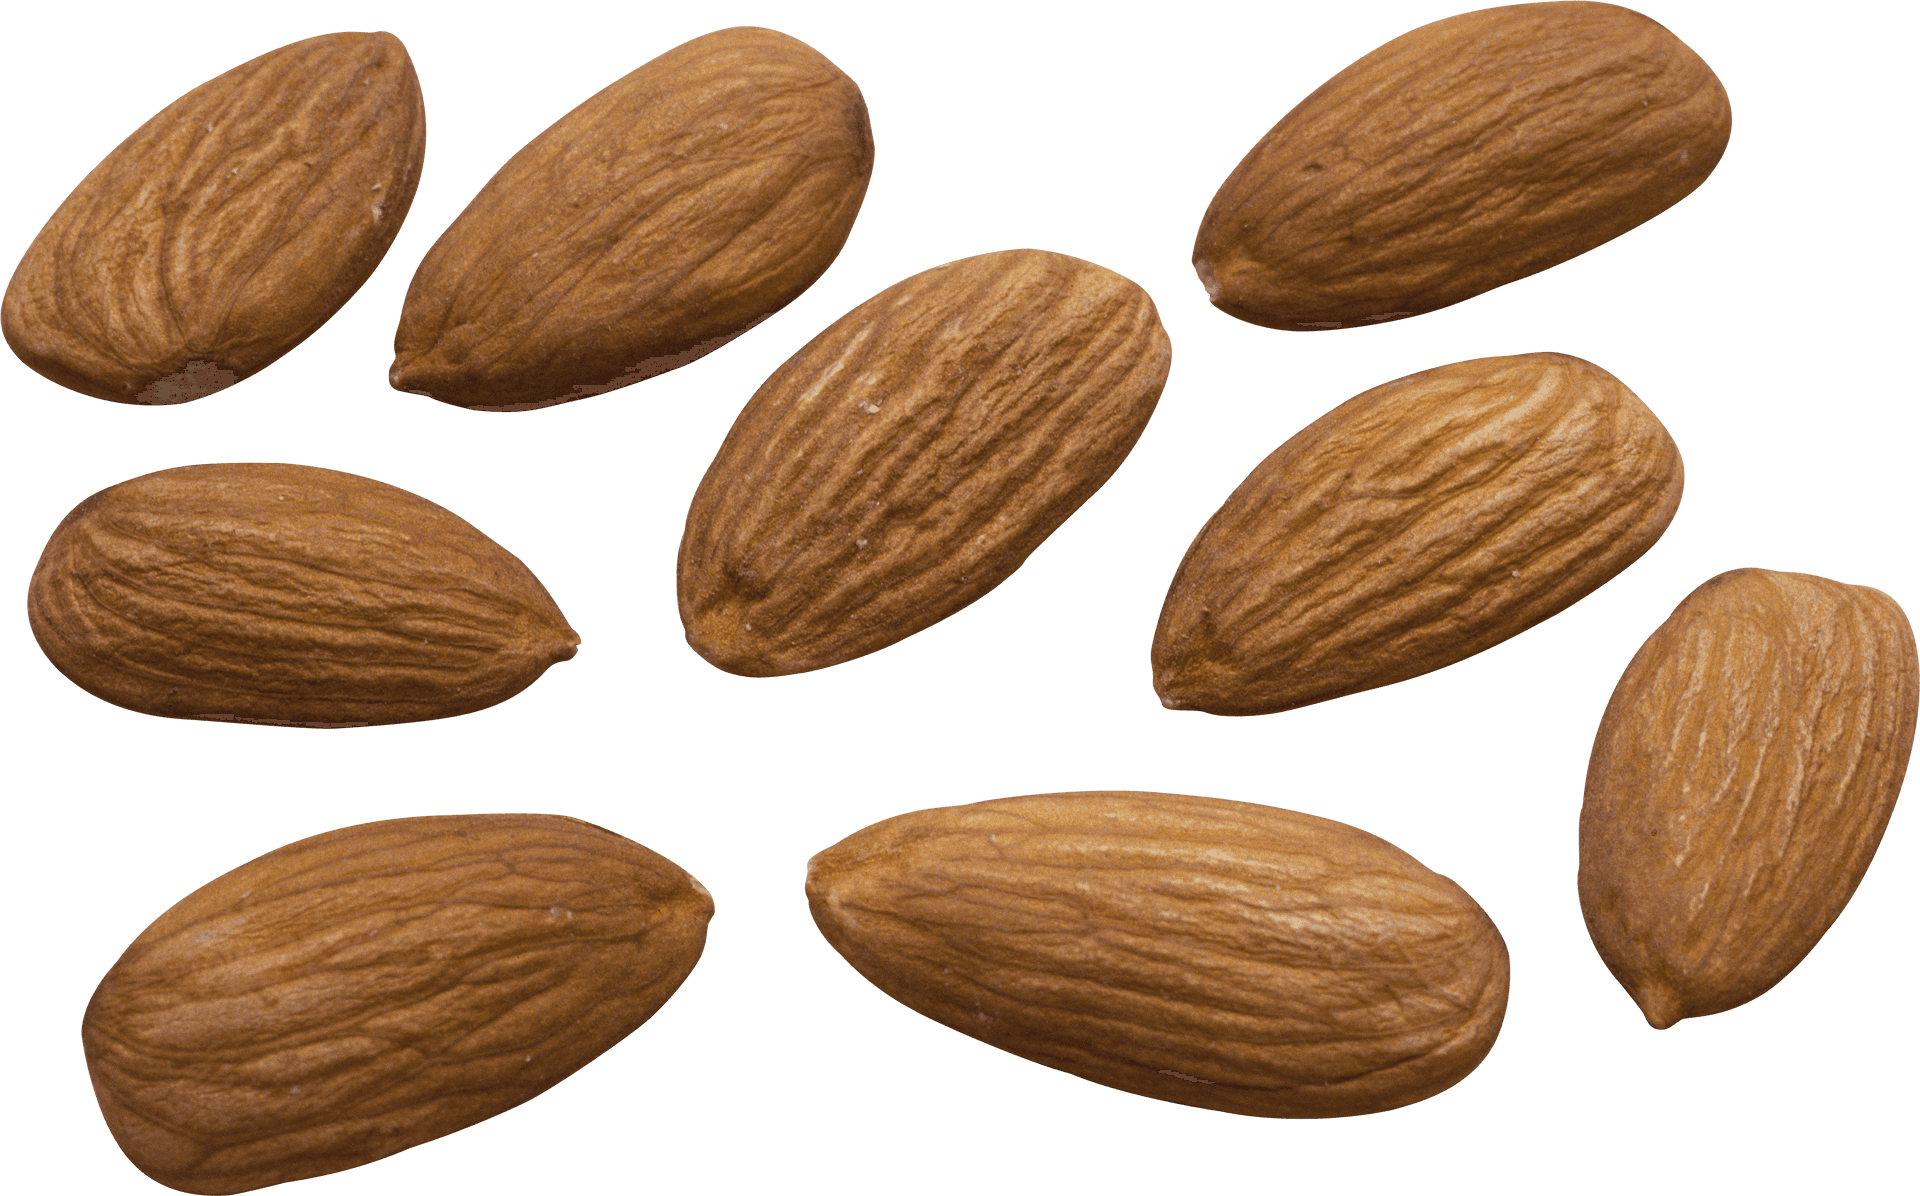 Scattered Almonds Isolated Background PNG